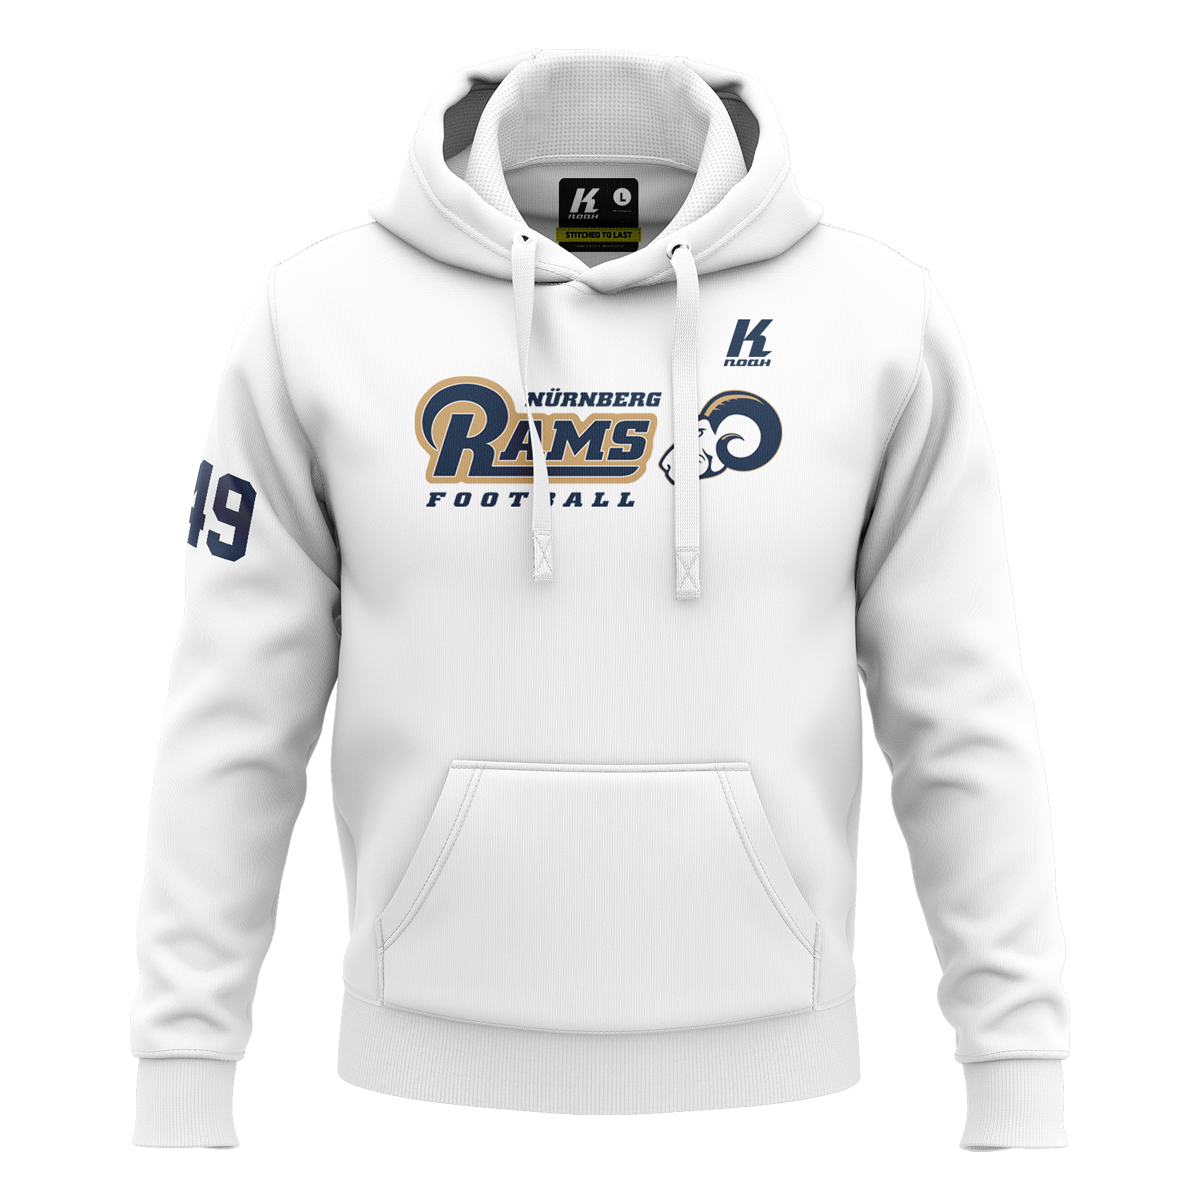 Rams Basic Hoodie Essential White with Playernumber/Initials